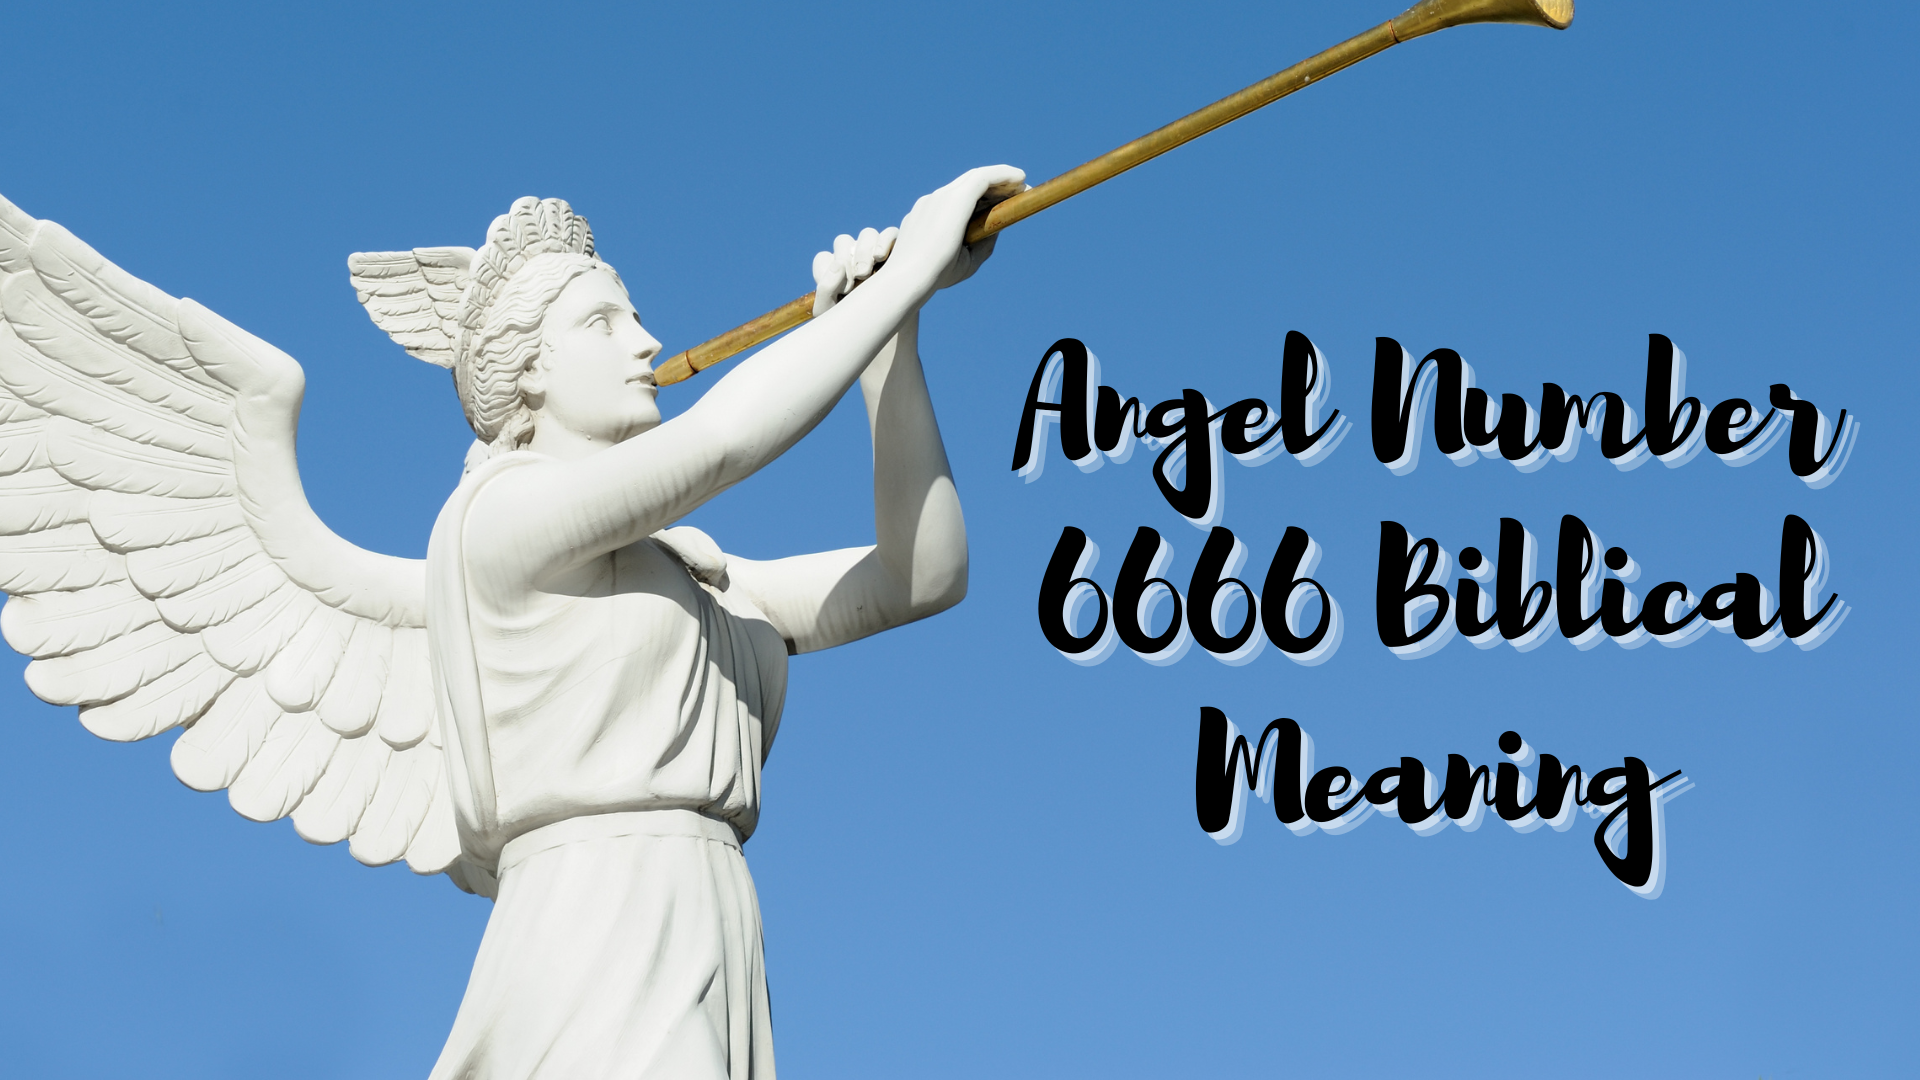 An angel statue holding a clarinet with words Angel Number 6666 Biblical Meaning